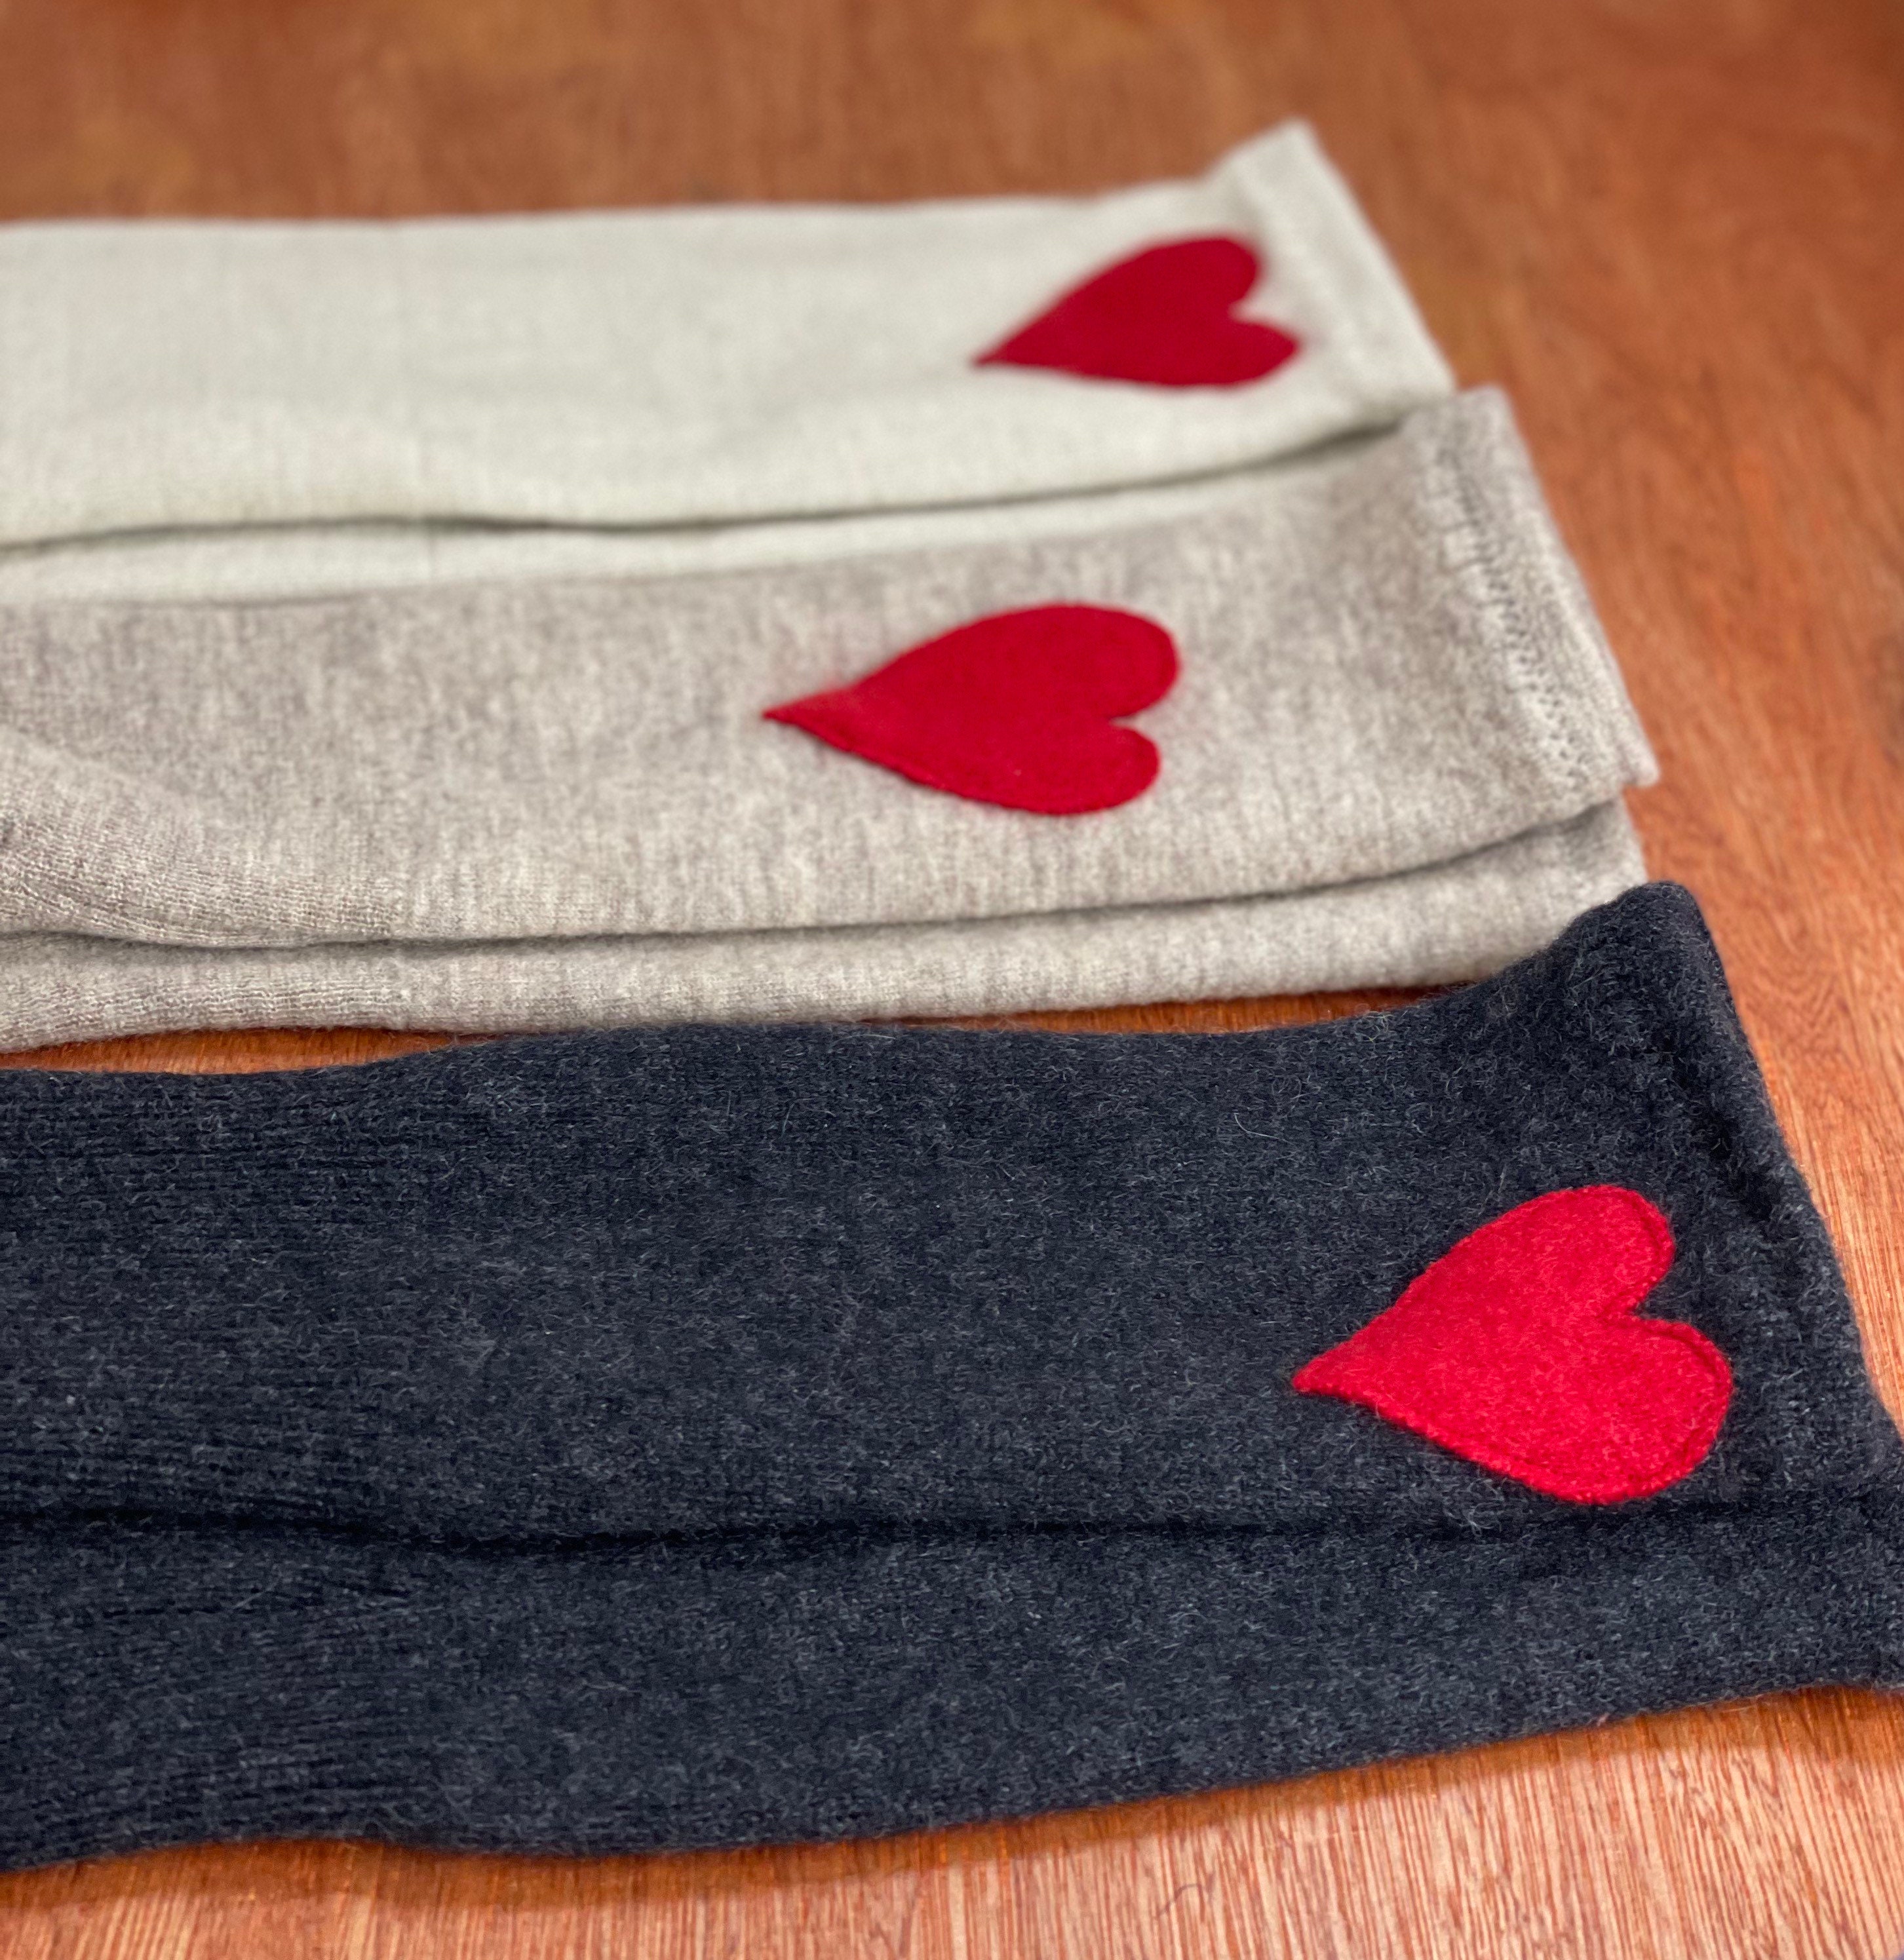 Limited edition heart Cashmere Wrist Warmers no thumbs | Etsy